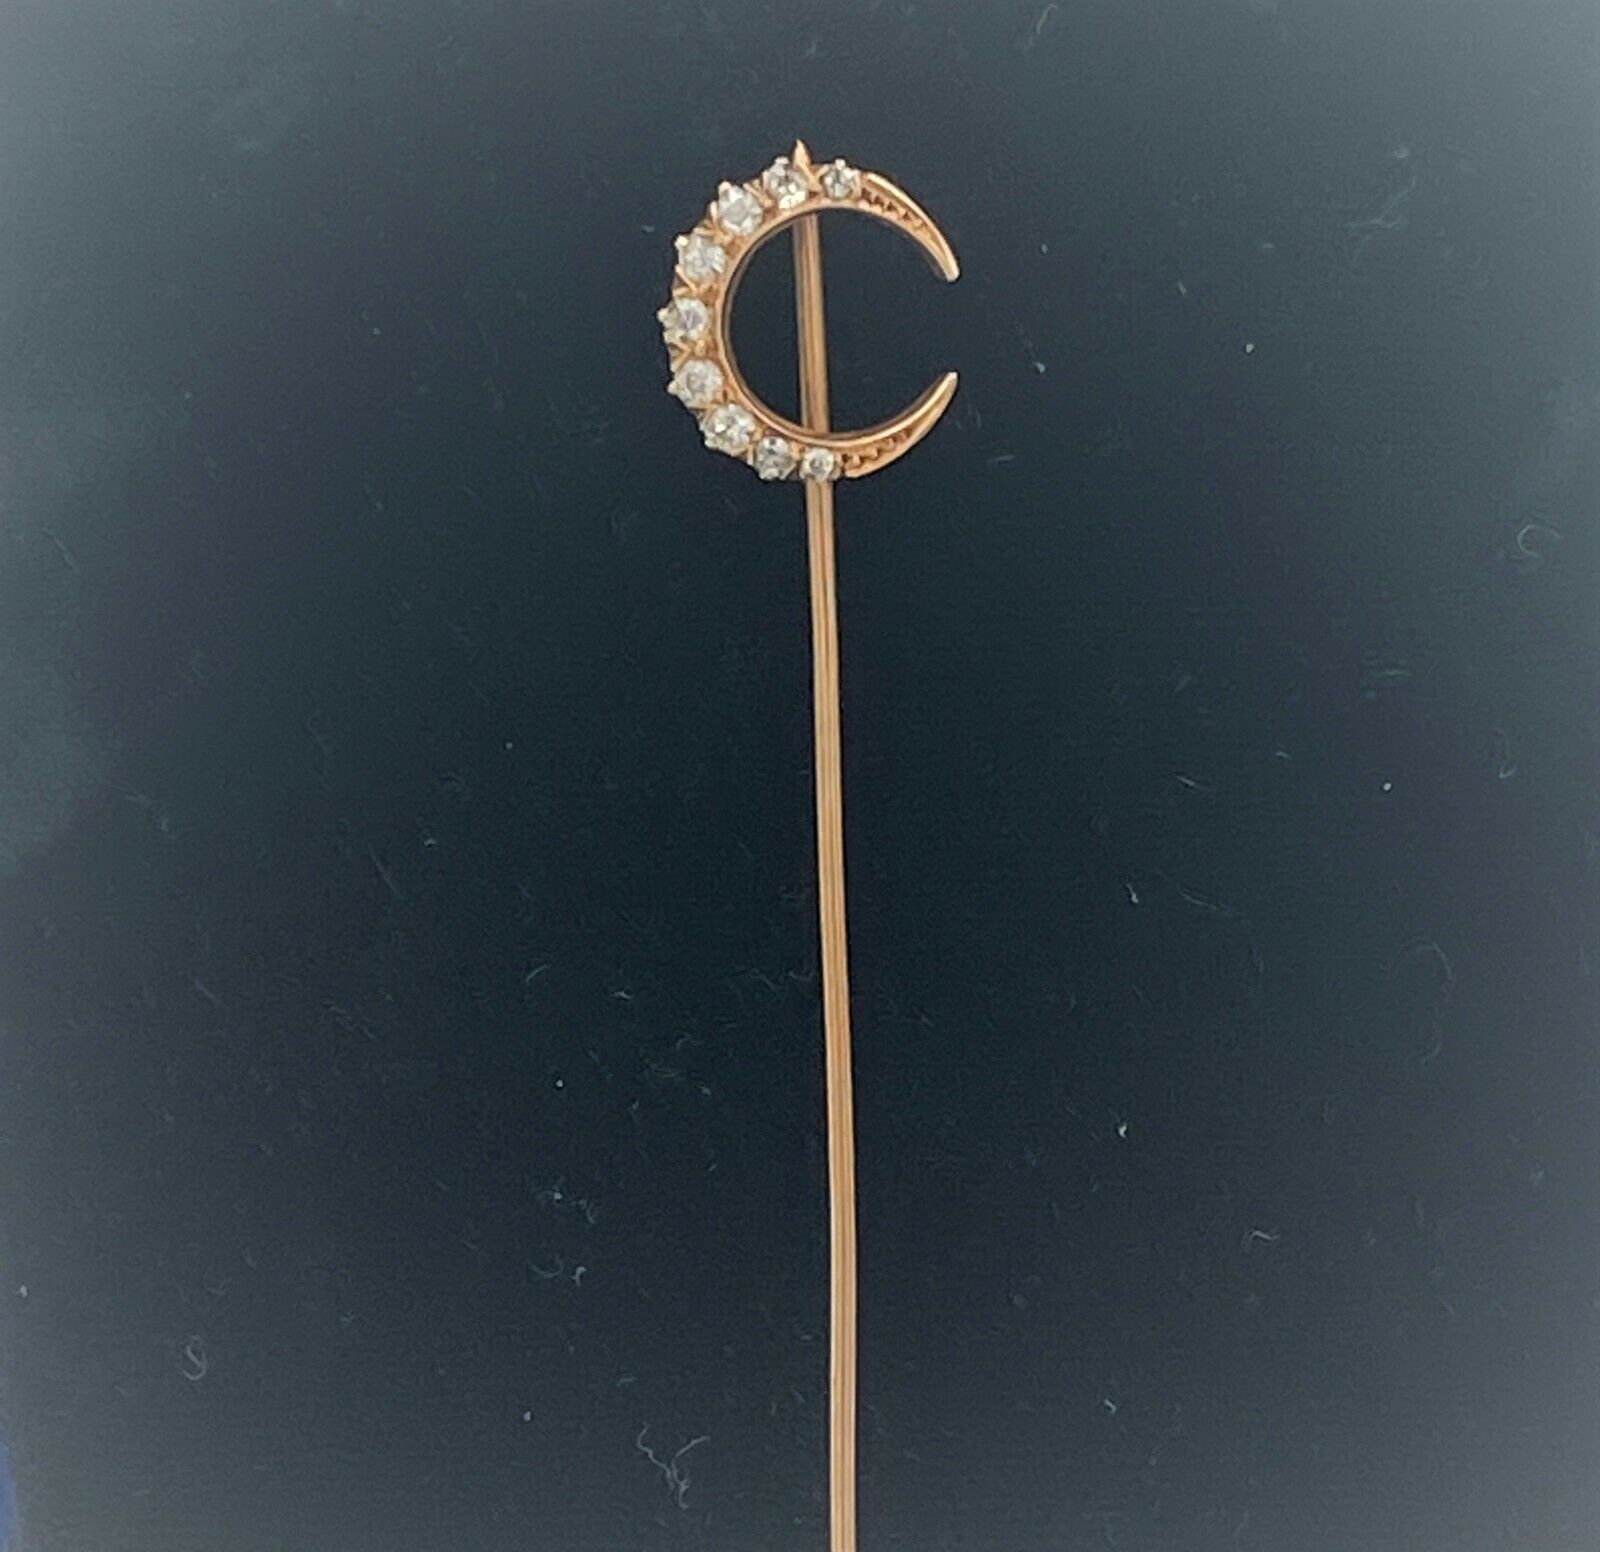 Antique Victorian 18K Stick Pin with 9 rose cut diamonds on a crescent moon